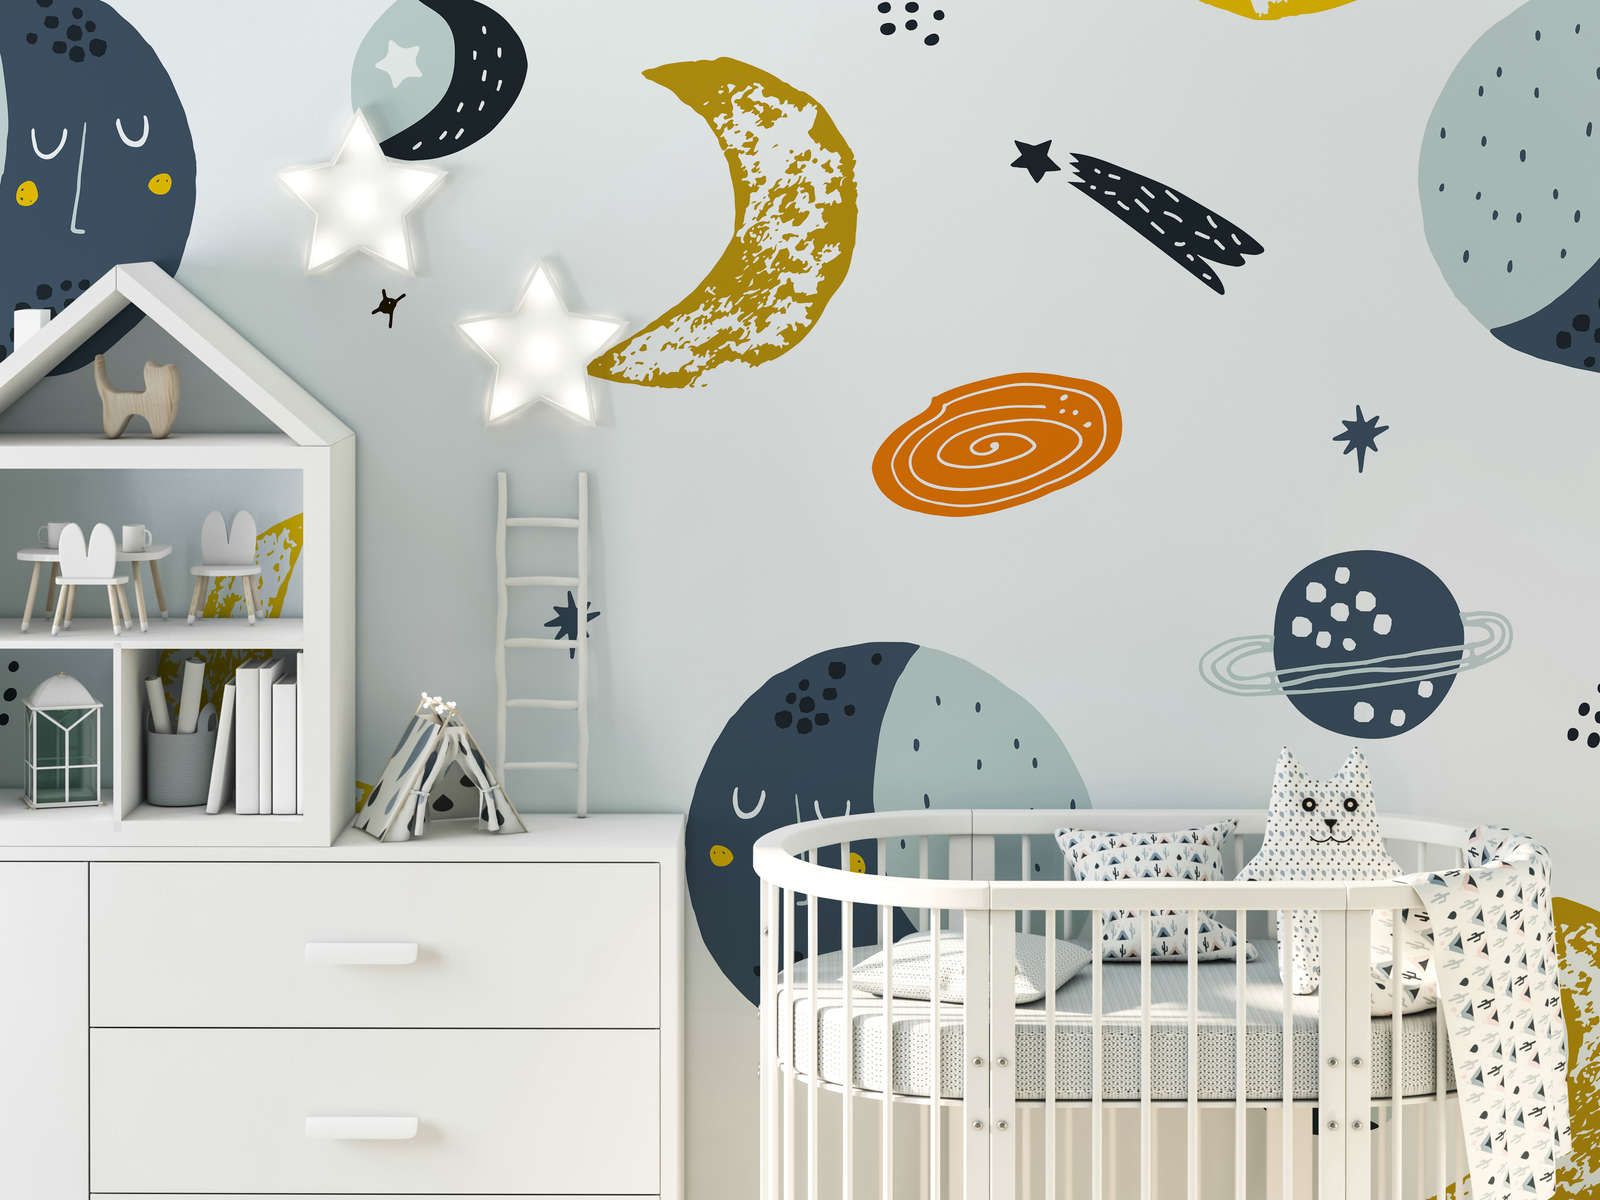             Moons and Shooting Stars Wallpaper - Smooth & pearlescent fleece
        